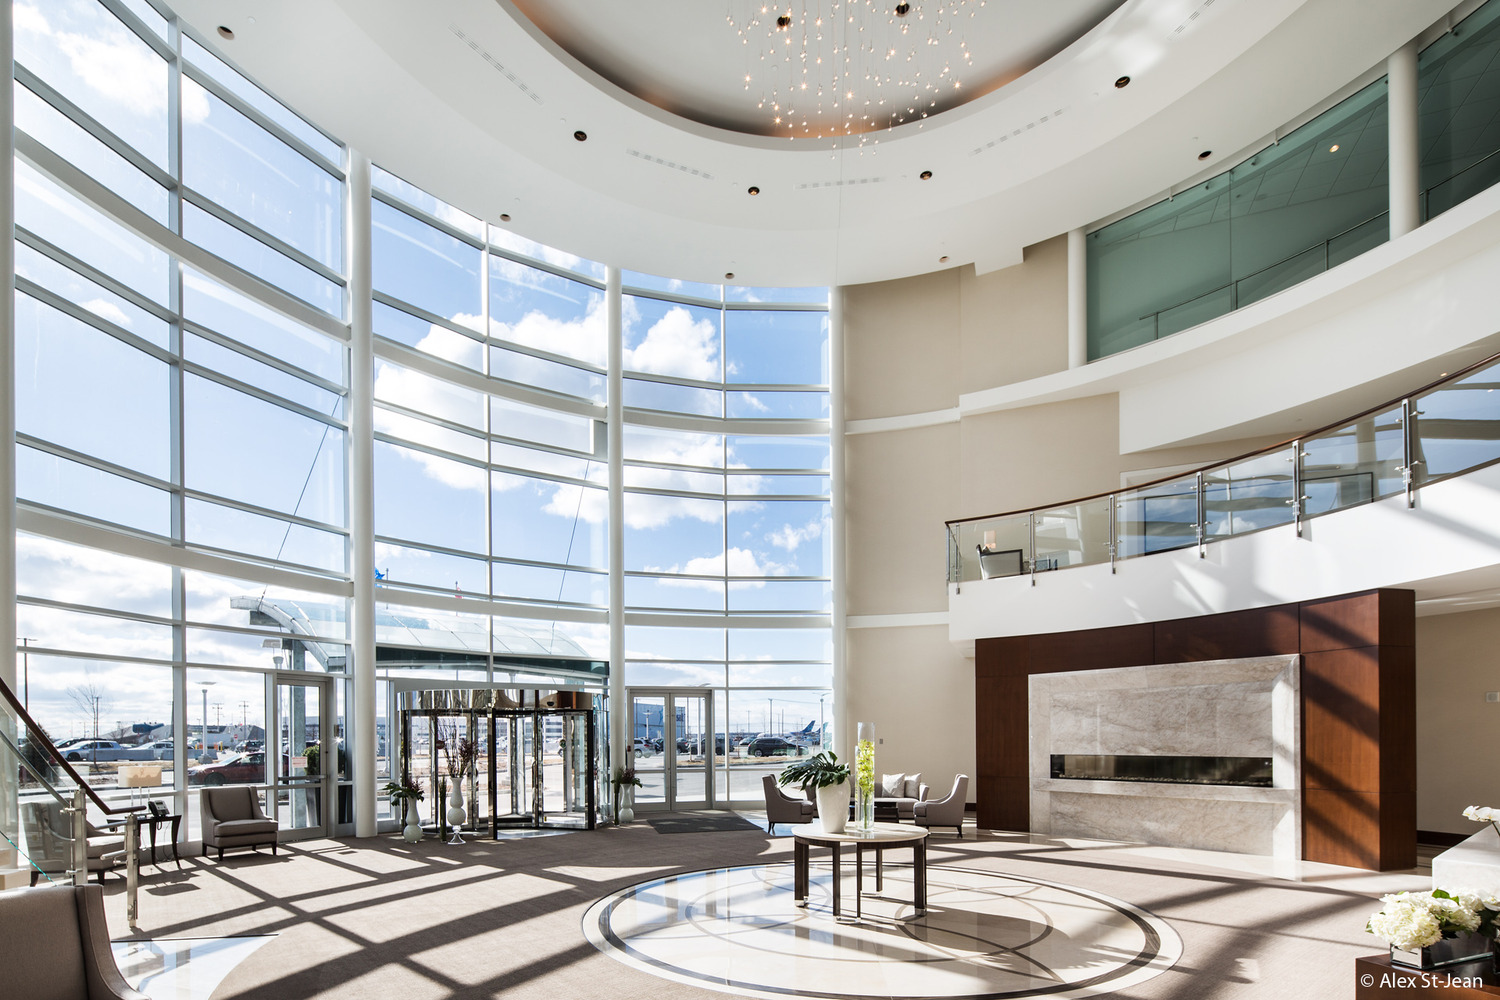 The lobby of a modern building with large windows.